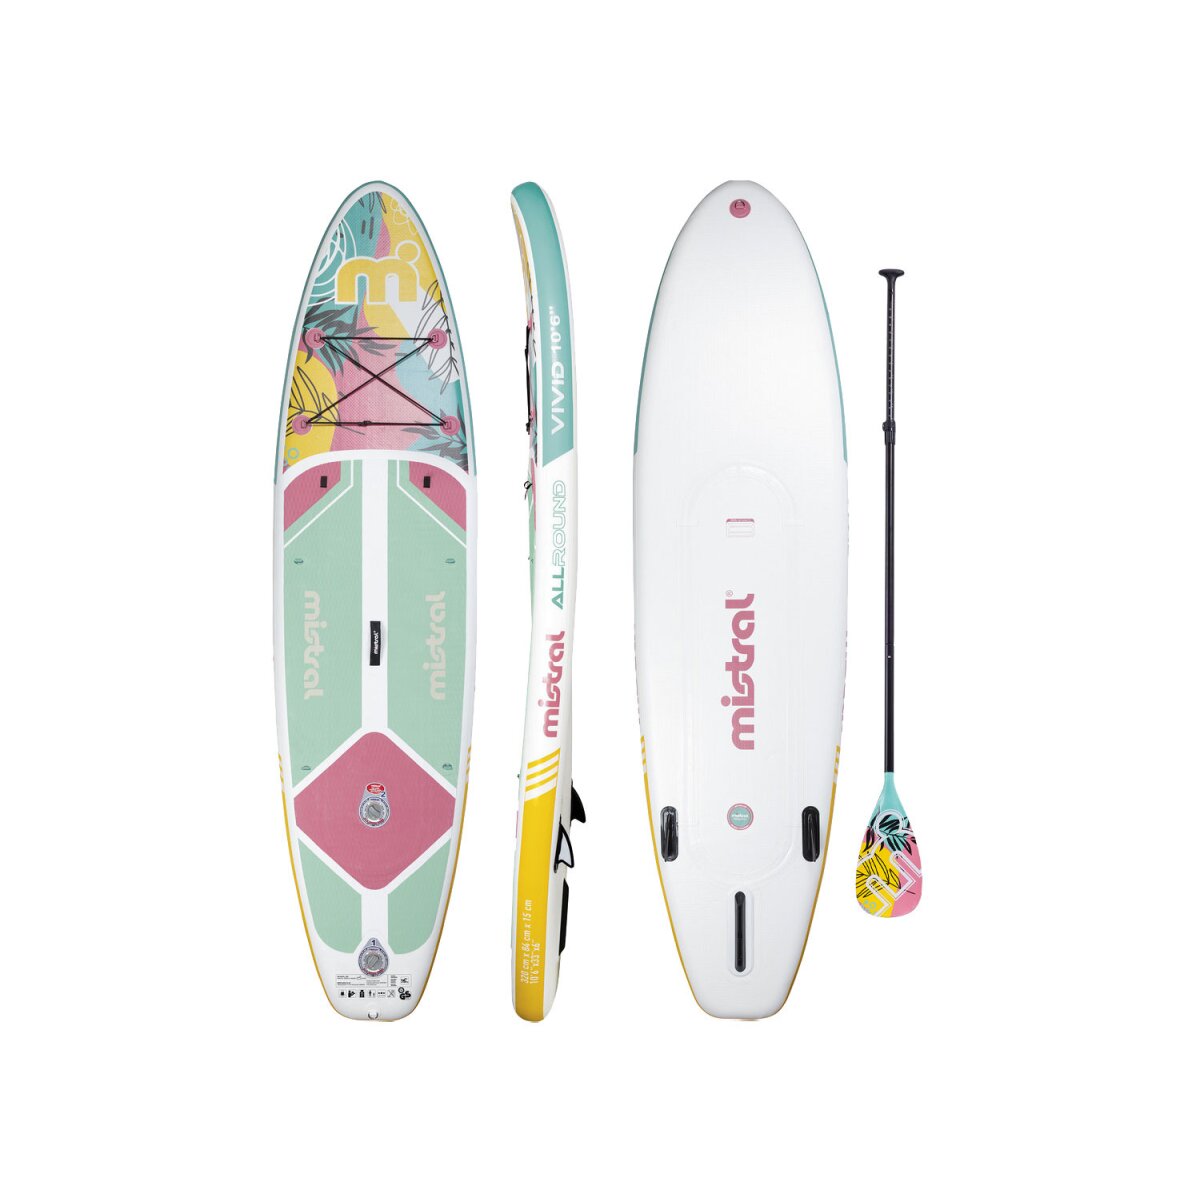 Mistral SUP »Allround-Vivid 10\'6 Zoll« mit Doppelkammer-System - B-Ware  sehr gut, 271,99 € | Stand-up Paddleboards